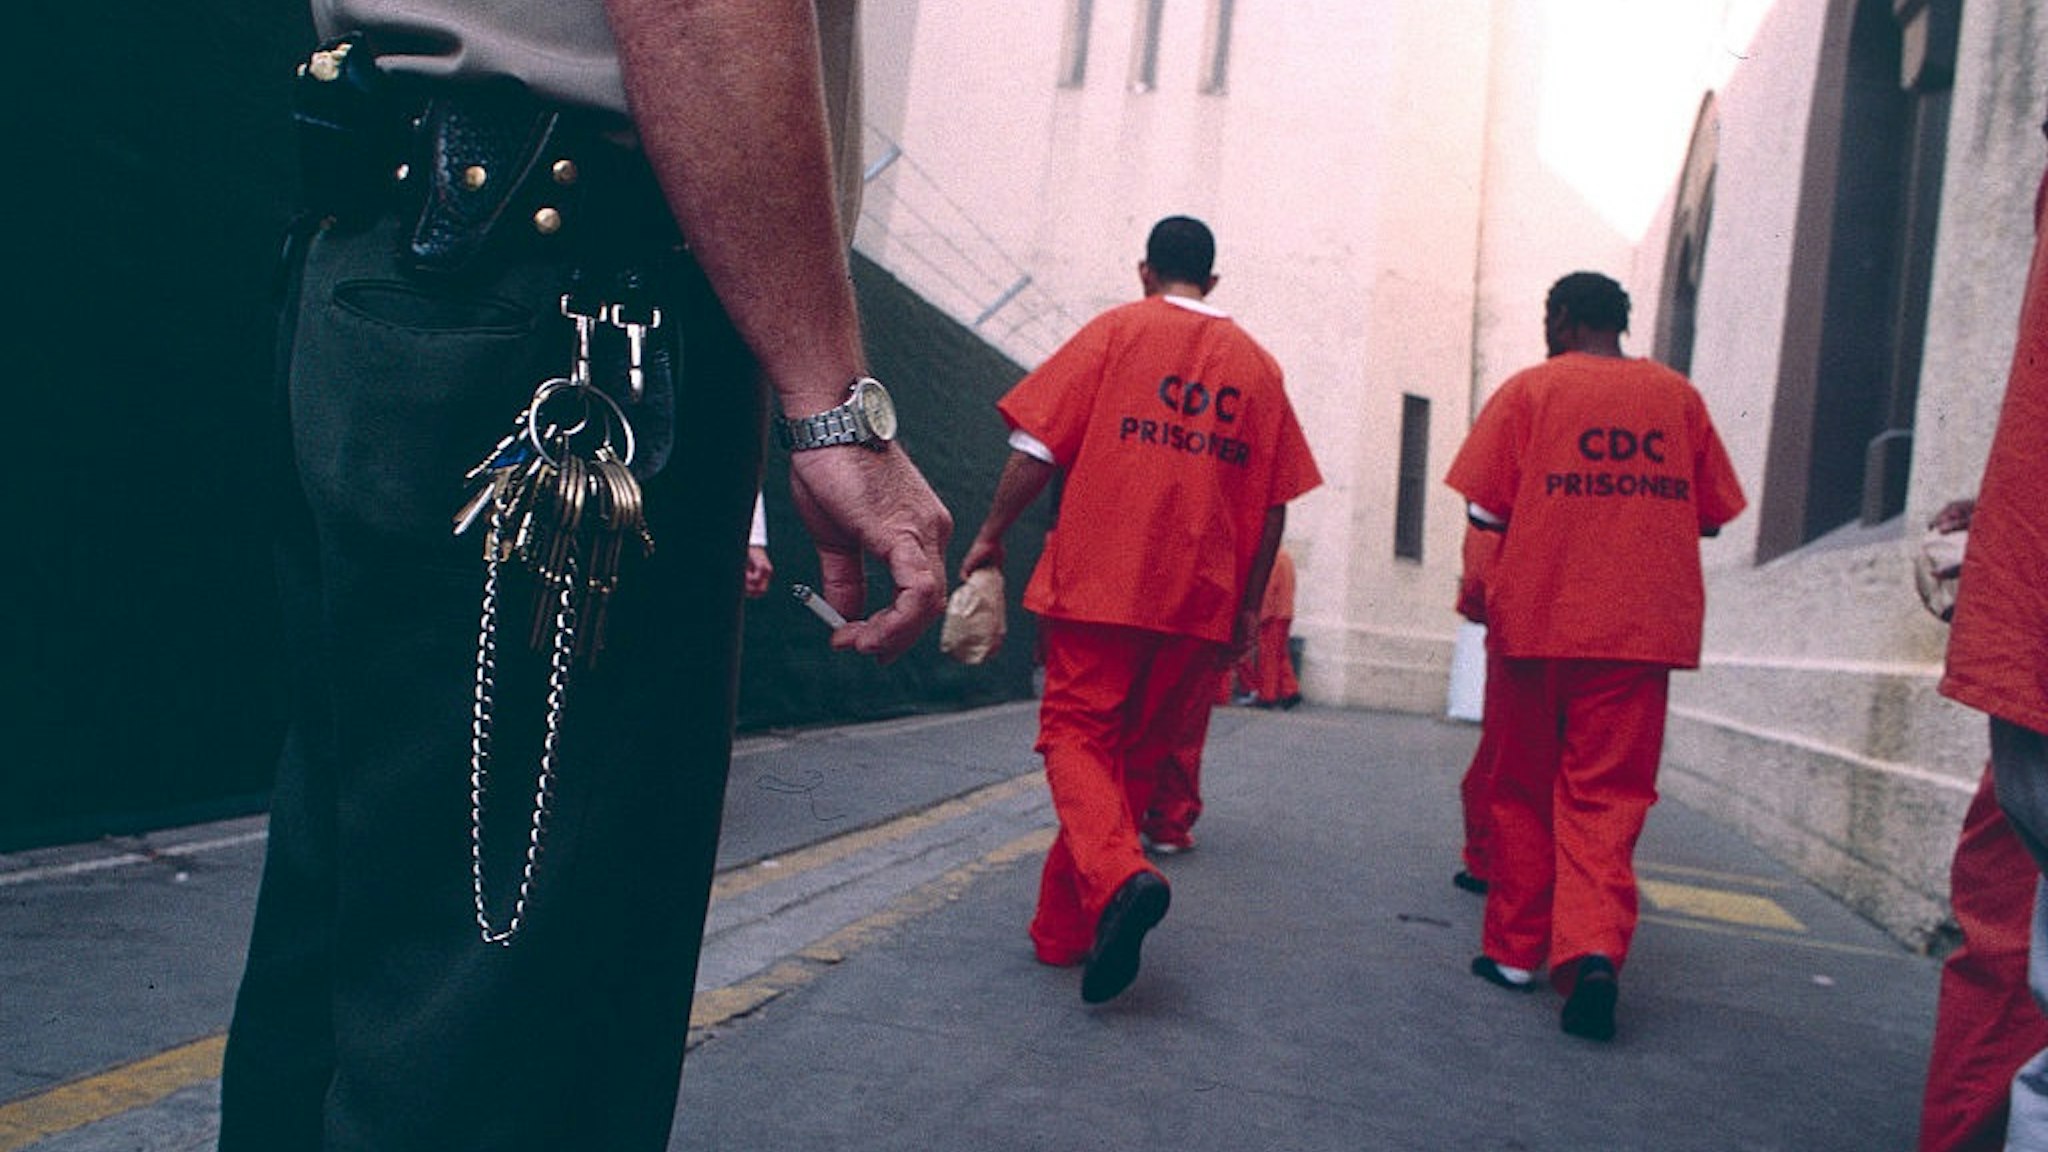 A California corrections officer watches over prisoners at San Quentin.